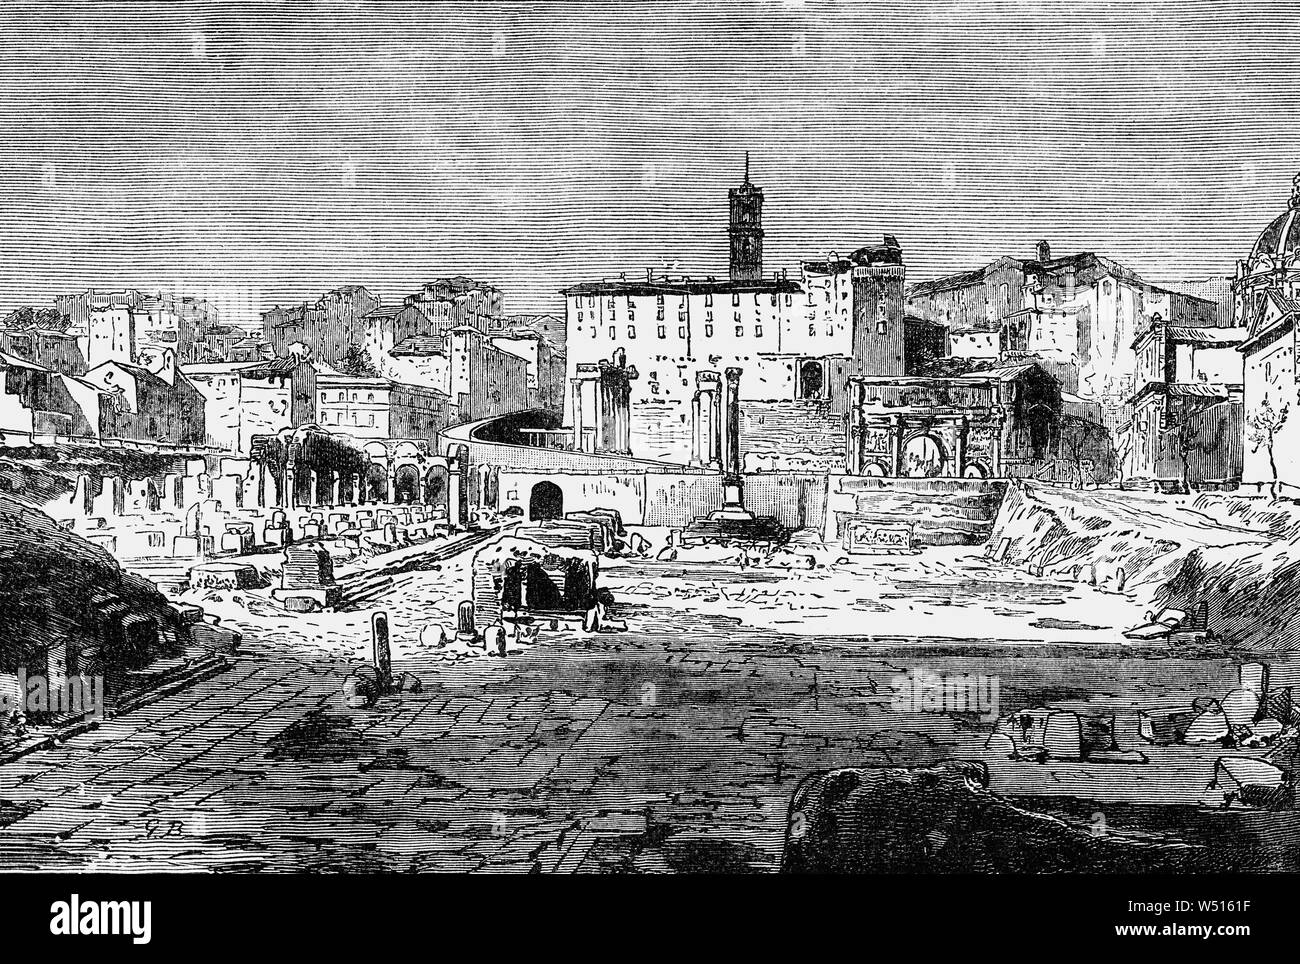 A 19th Century view of the ruins of the Roman Forum, also known by its Latin name Forum Romanum, a rectangular forum (plaza) surrounded by the ruins of several important ancient government buildings at the center of the city of Rome. Citizens of the ancient city referred to this space, originally a marketplace, as the Forum Magnum, or simply the Forum. For centuries it was the center of day-to-day life in Rome: the site of triumphal processions and elections; the venue for speeches, trials, and the nucleus of commercial affairs, where statues and monuments commemorated the city's great men. Stock Photo